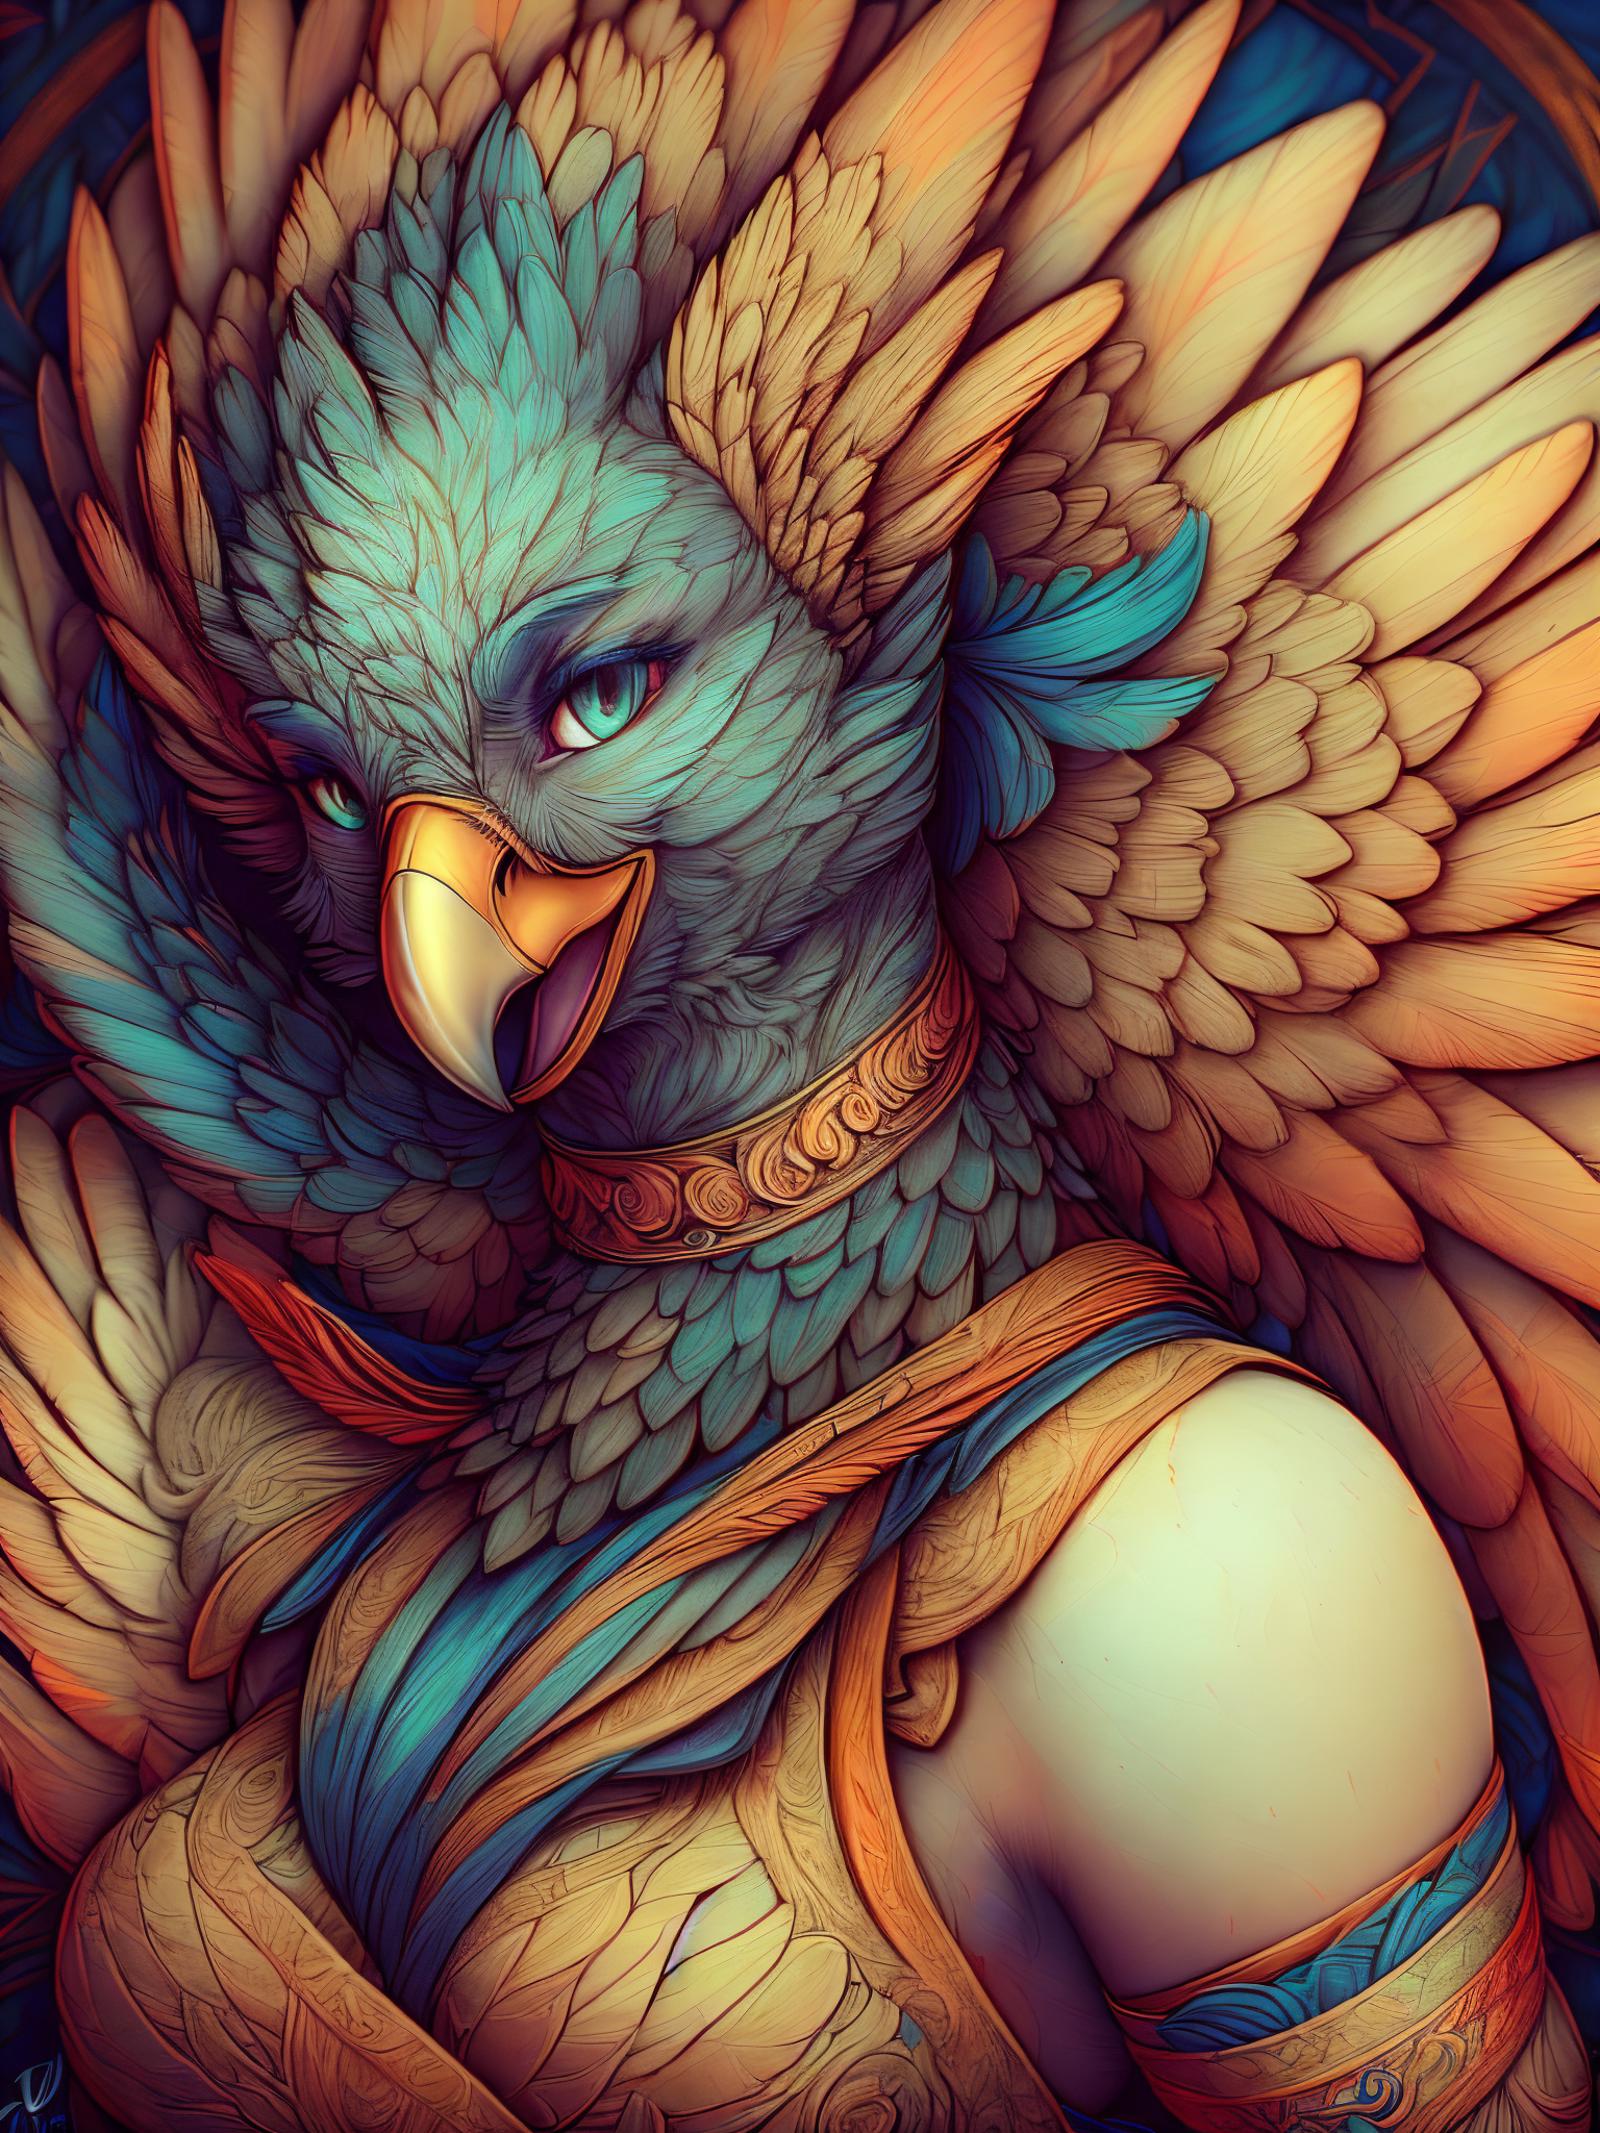 A beautifully colored illustration of a bird woman with a blue head and green eyes.